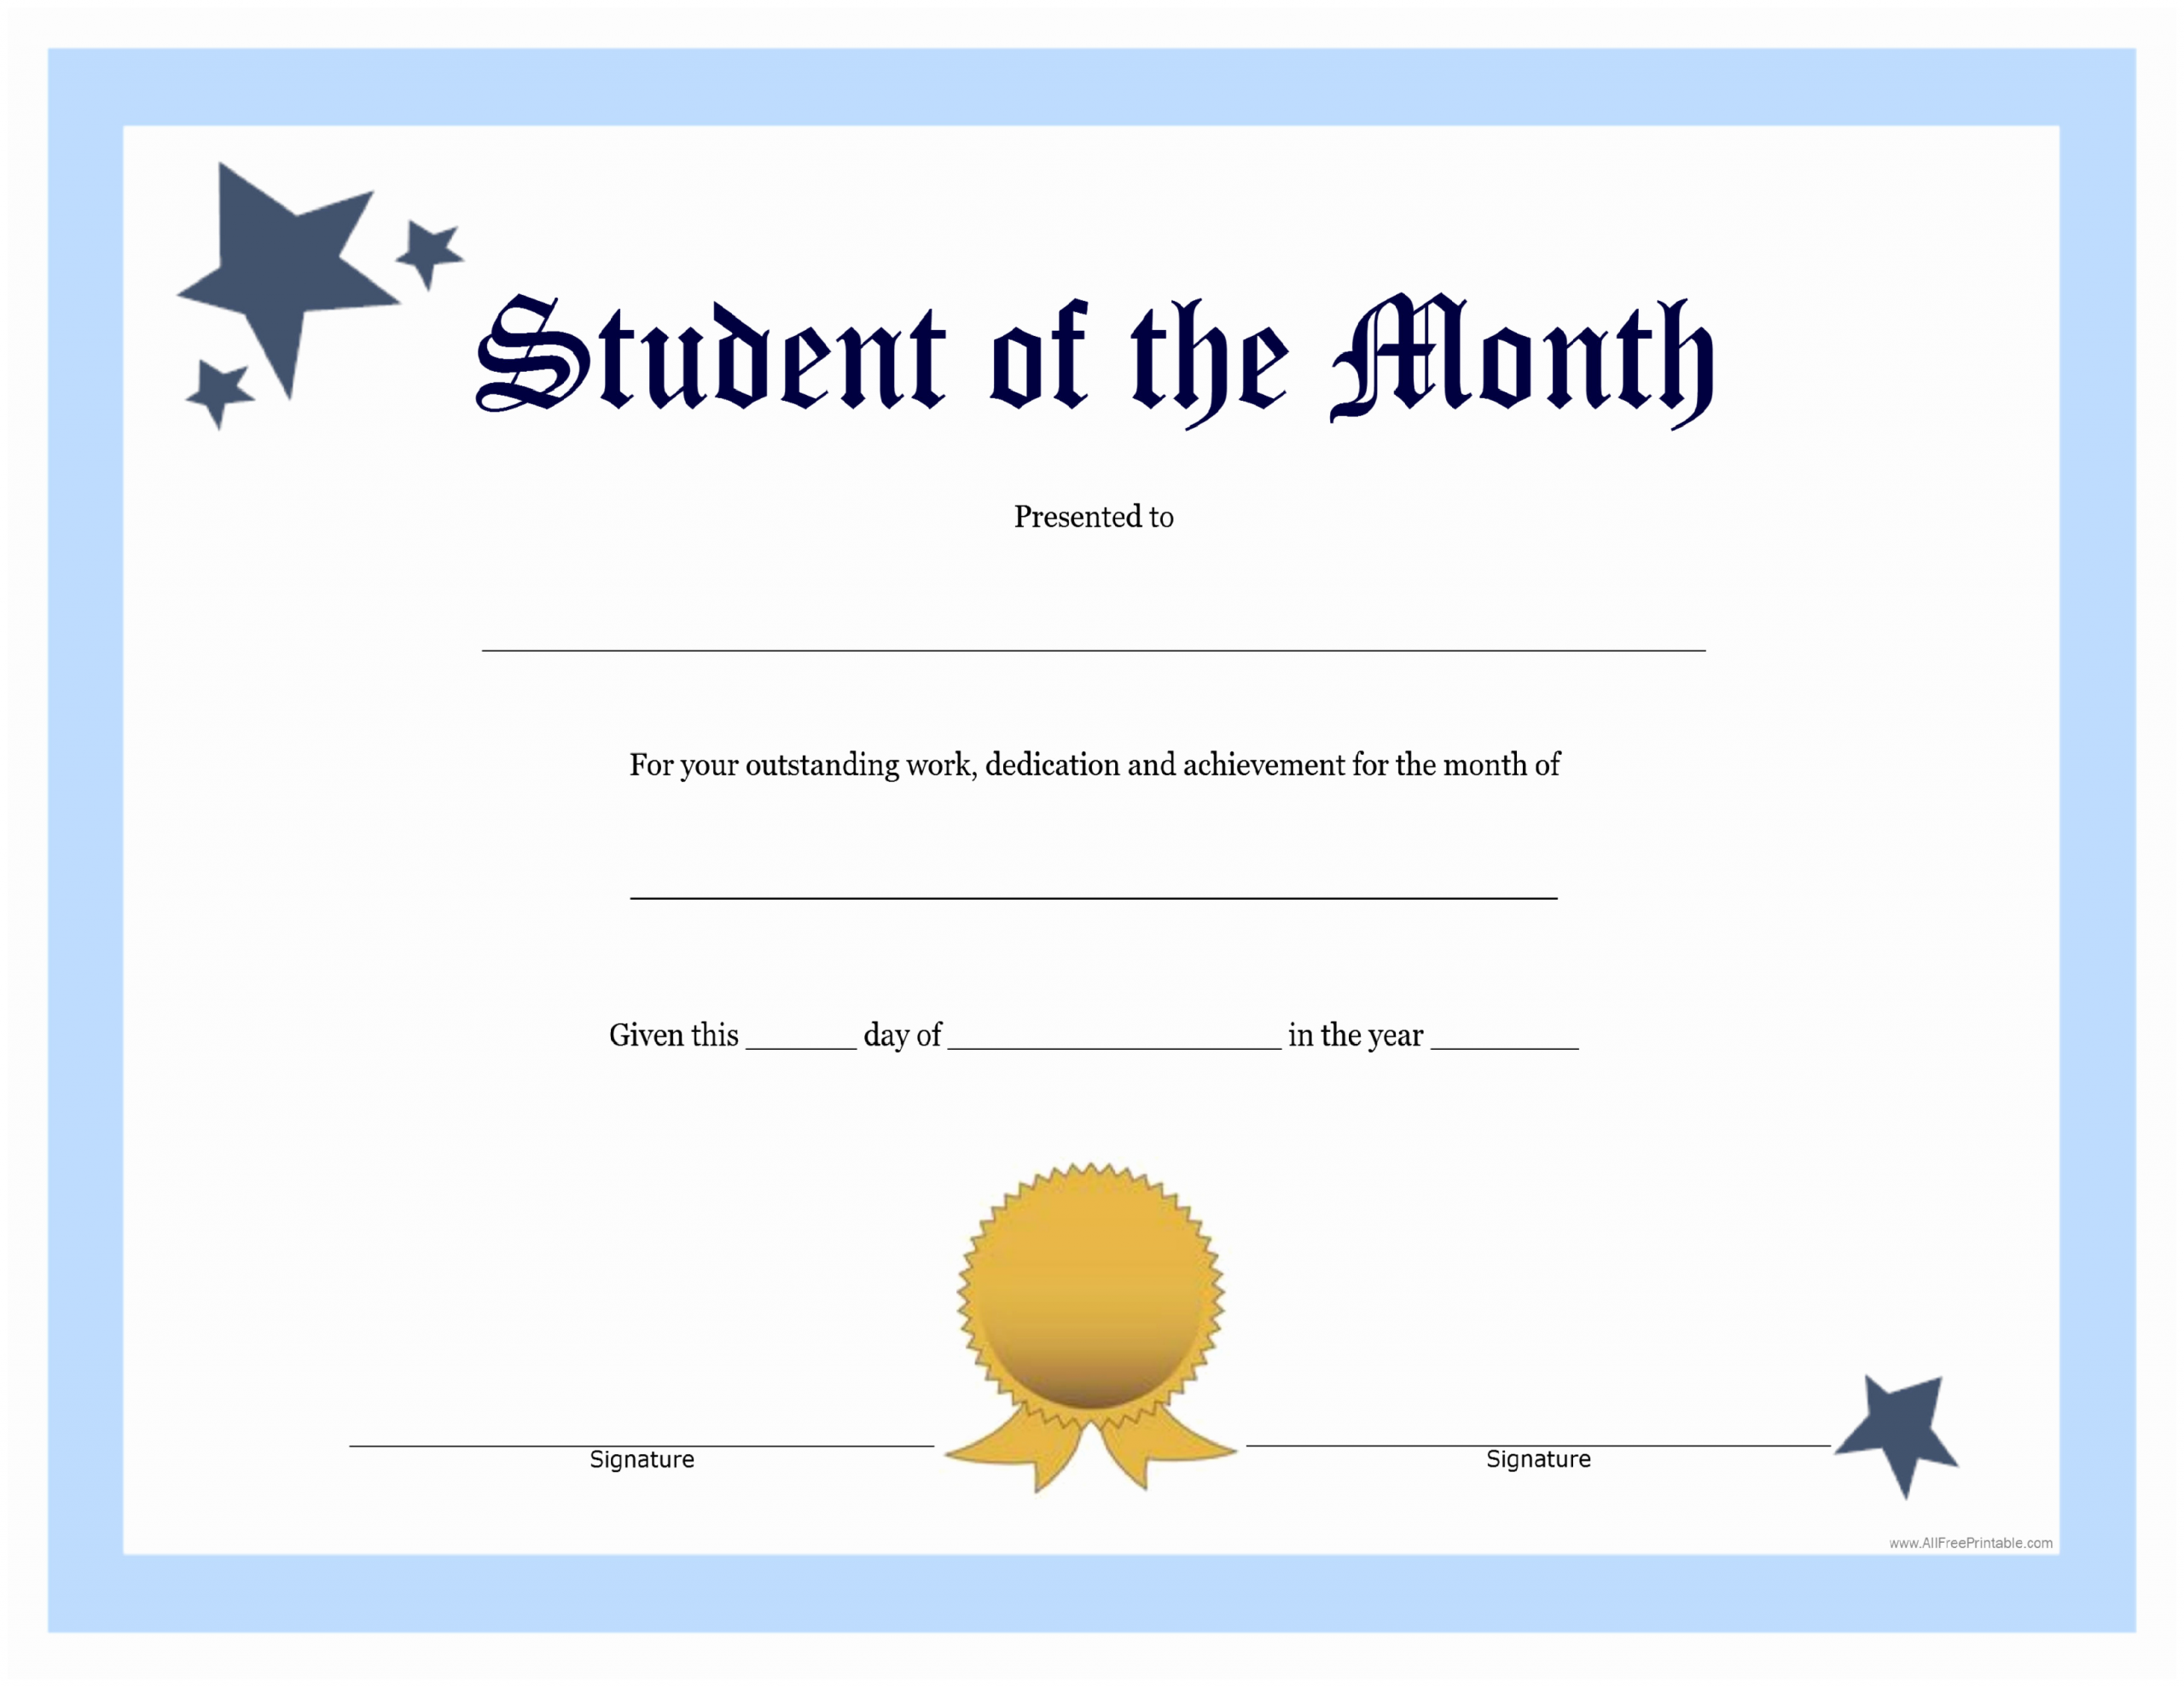 Student Of the Month Certificate Template Luxury Student the Month Template